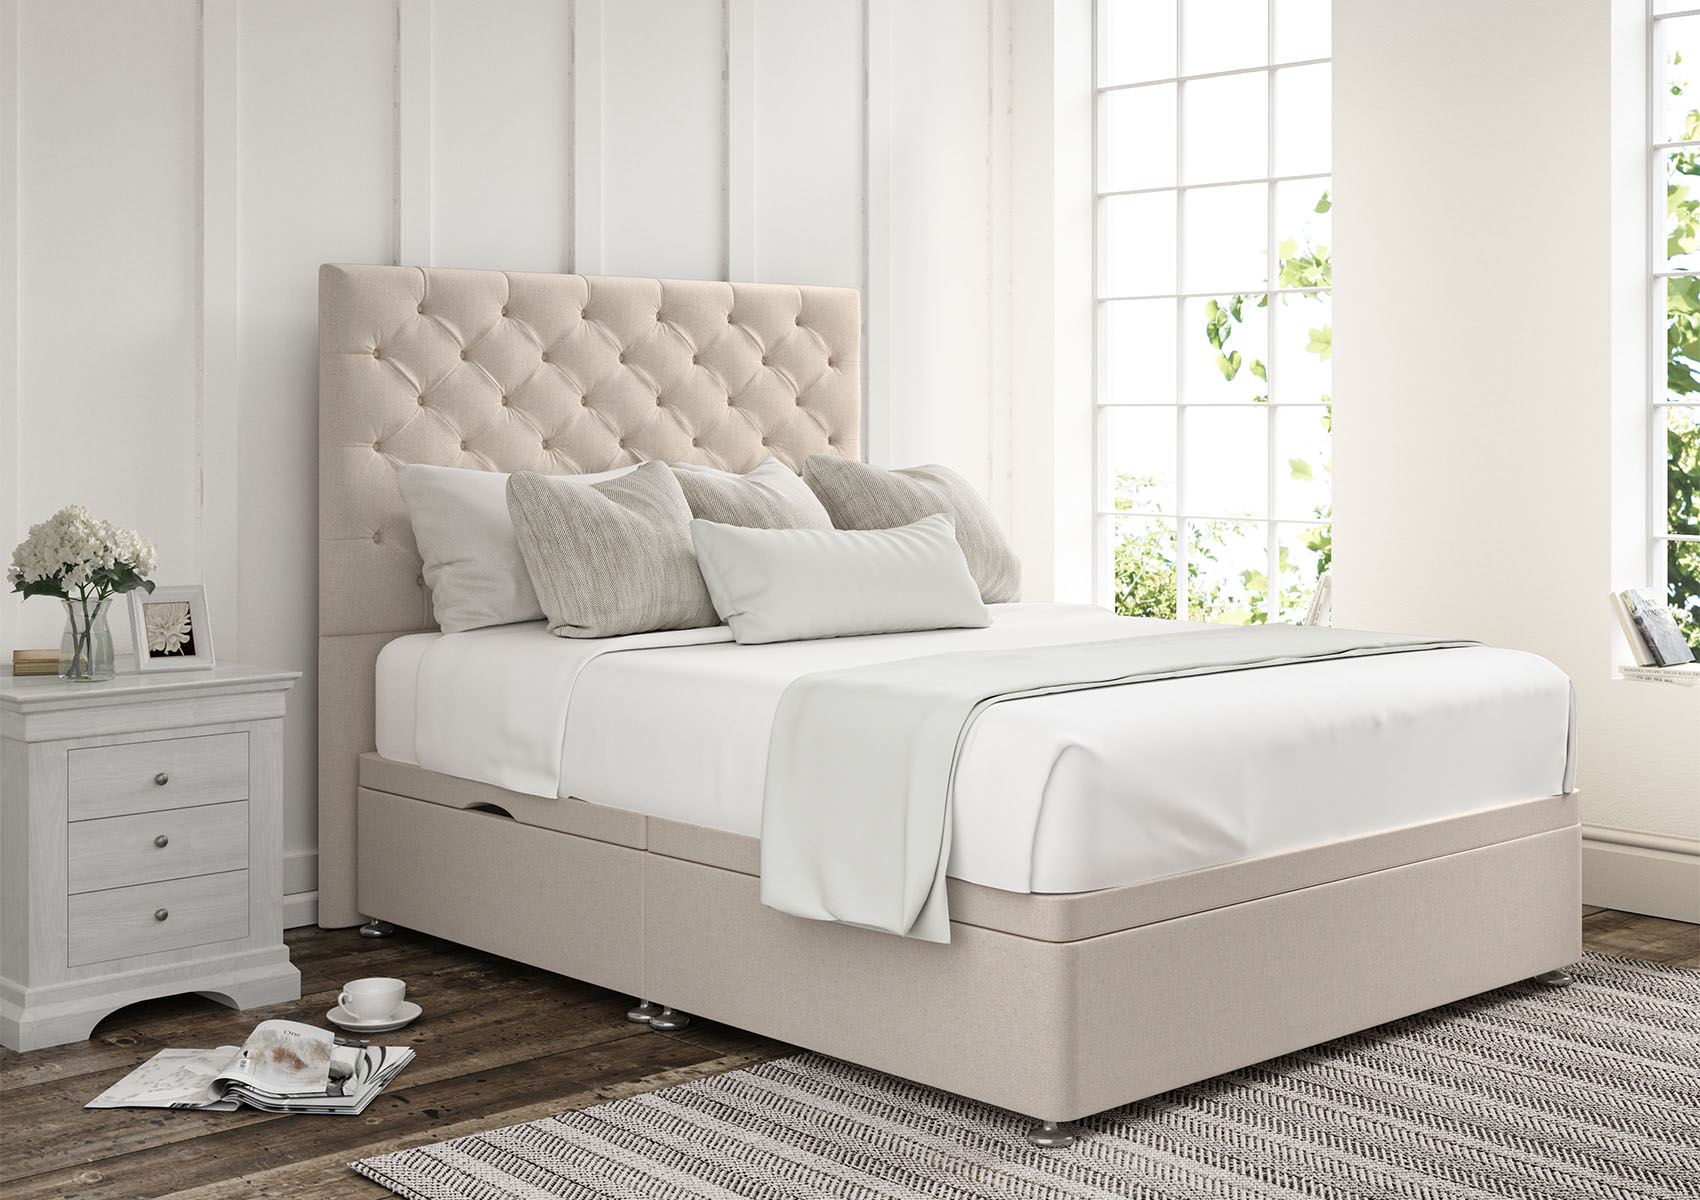 View Chesterfield Carina Parchment Upholstered Compact Double Ottoman Bed Time4Sleep information